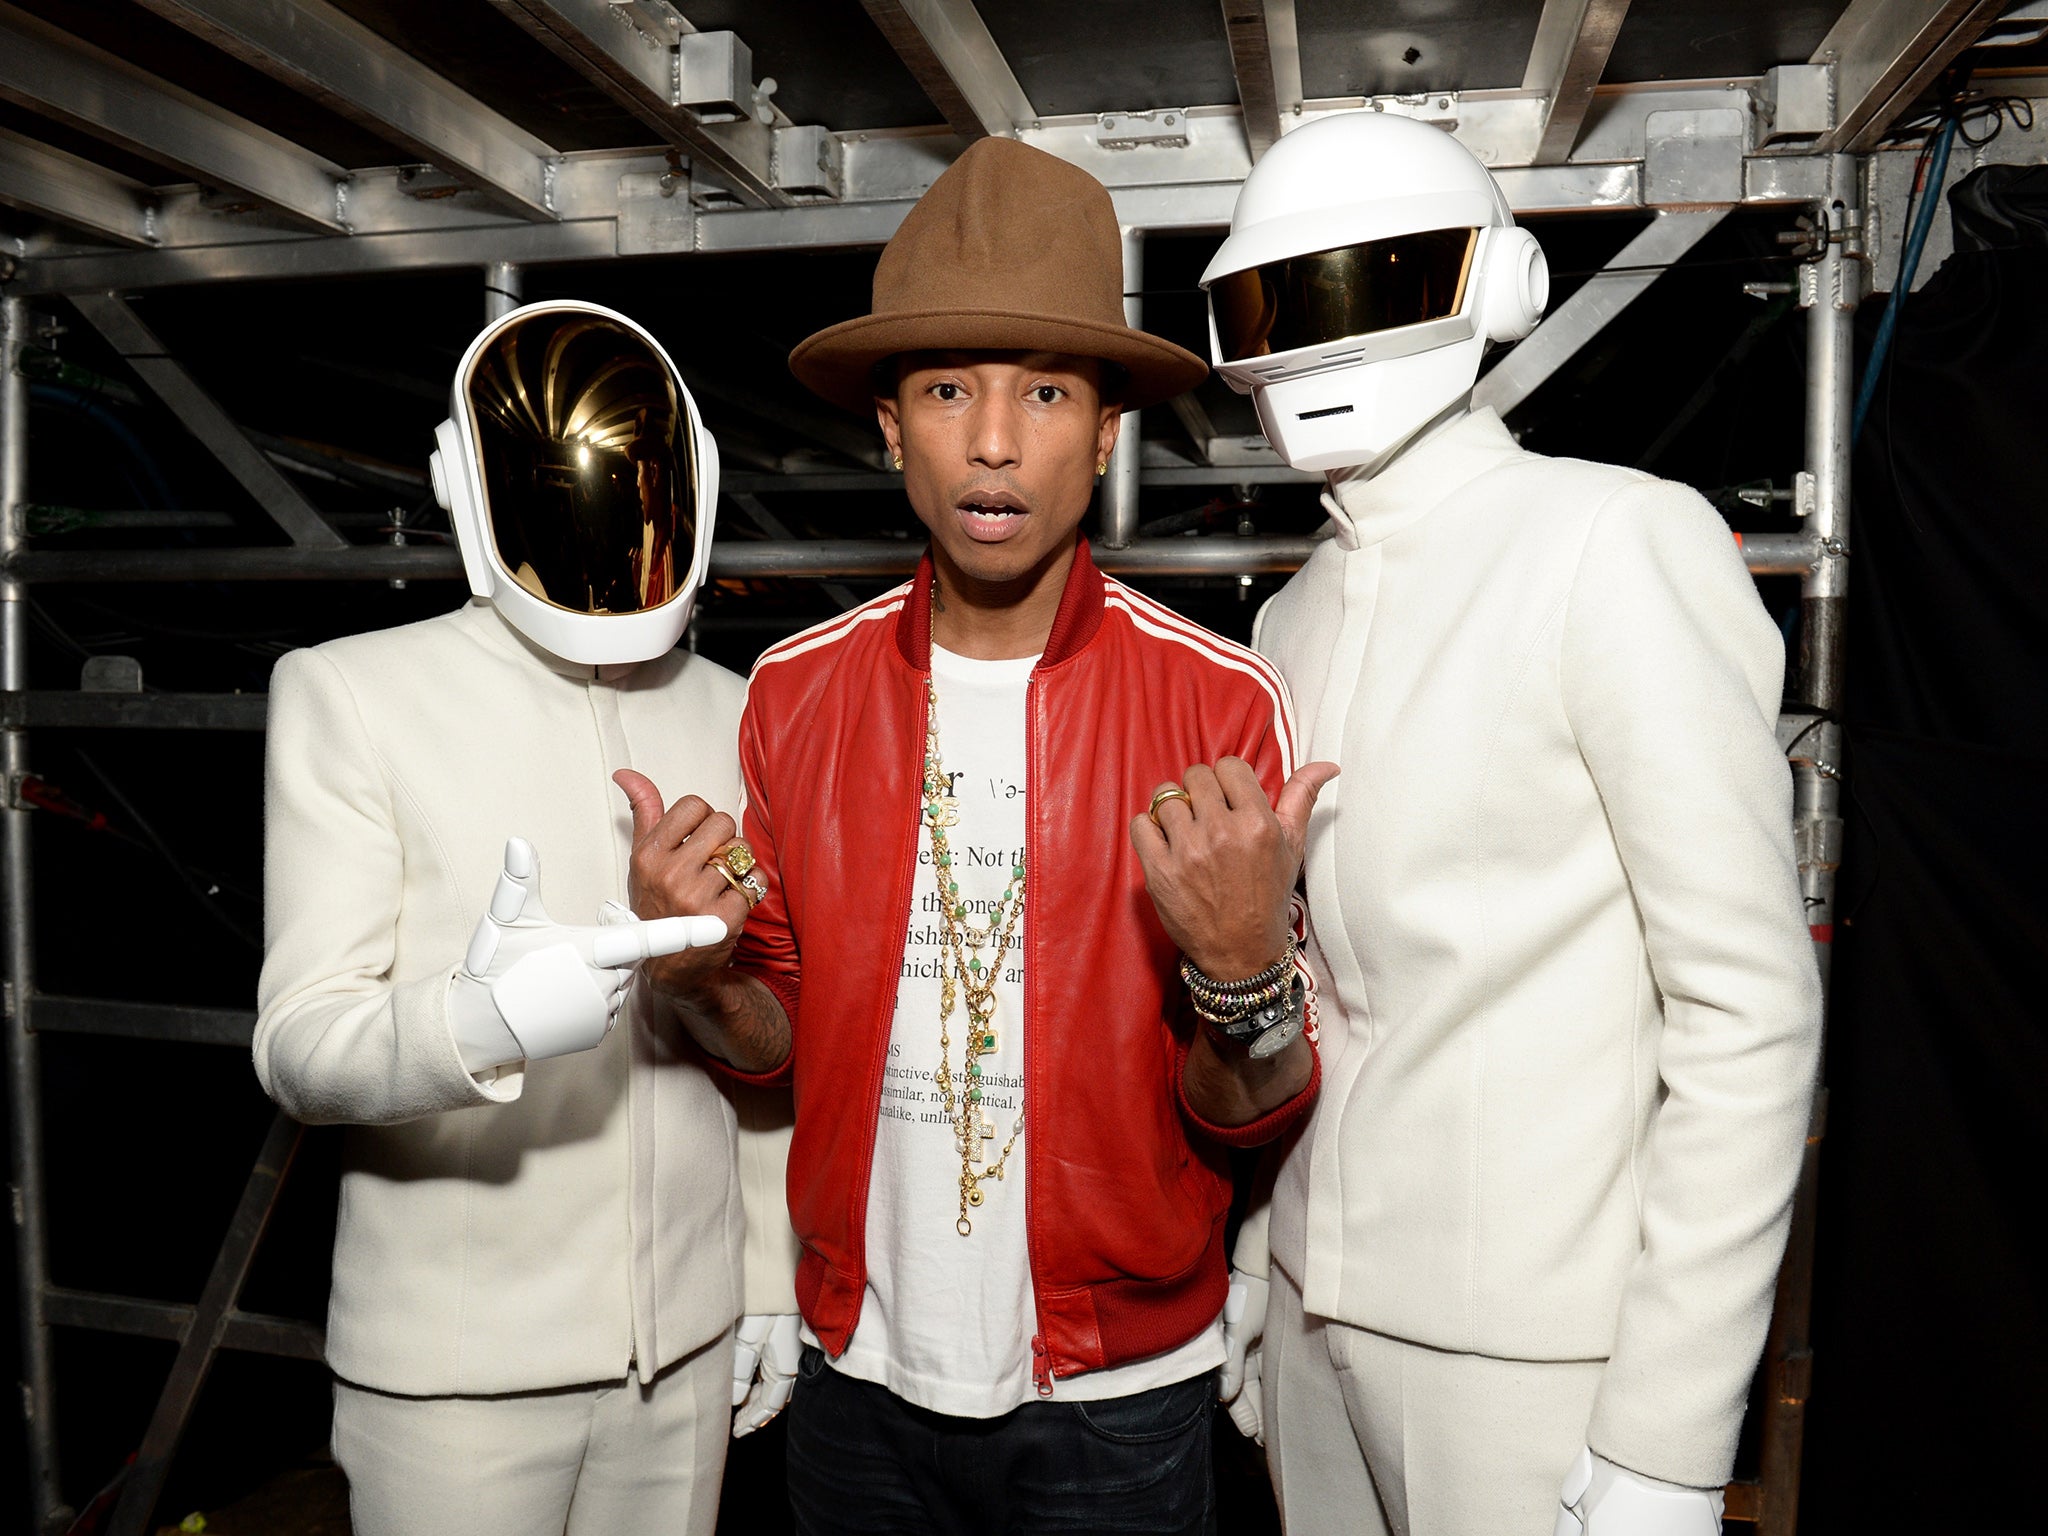 Pharrell Williams and Daft Punk at the Grammy Awards in Los Angeles. (Photo by Michael Kovac/WireImage)